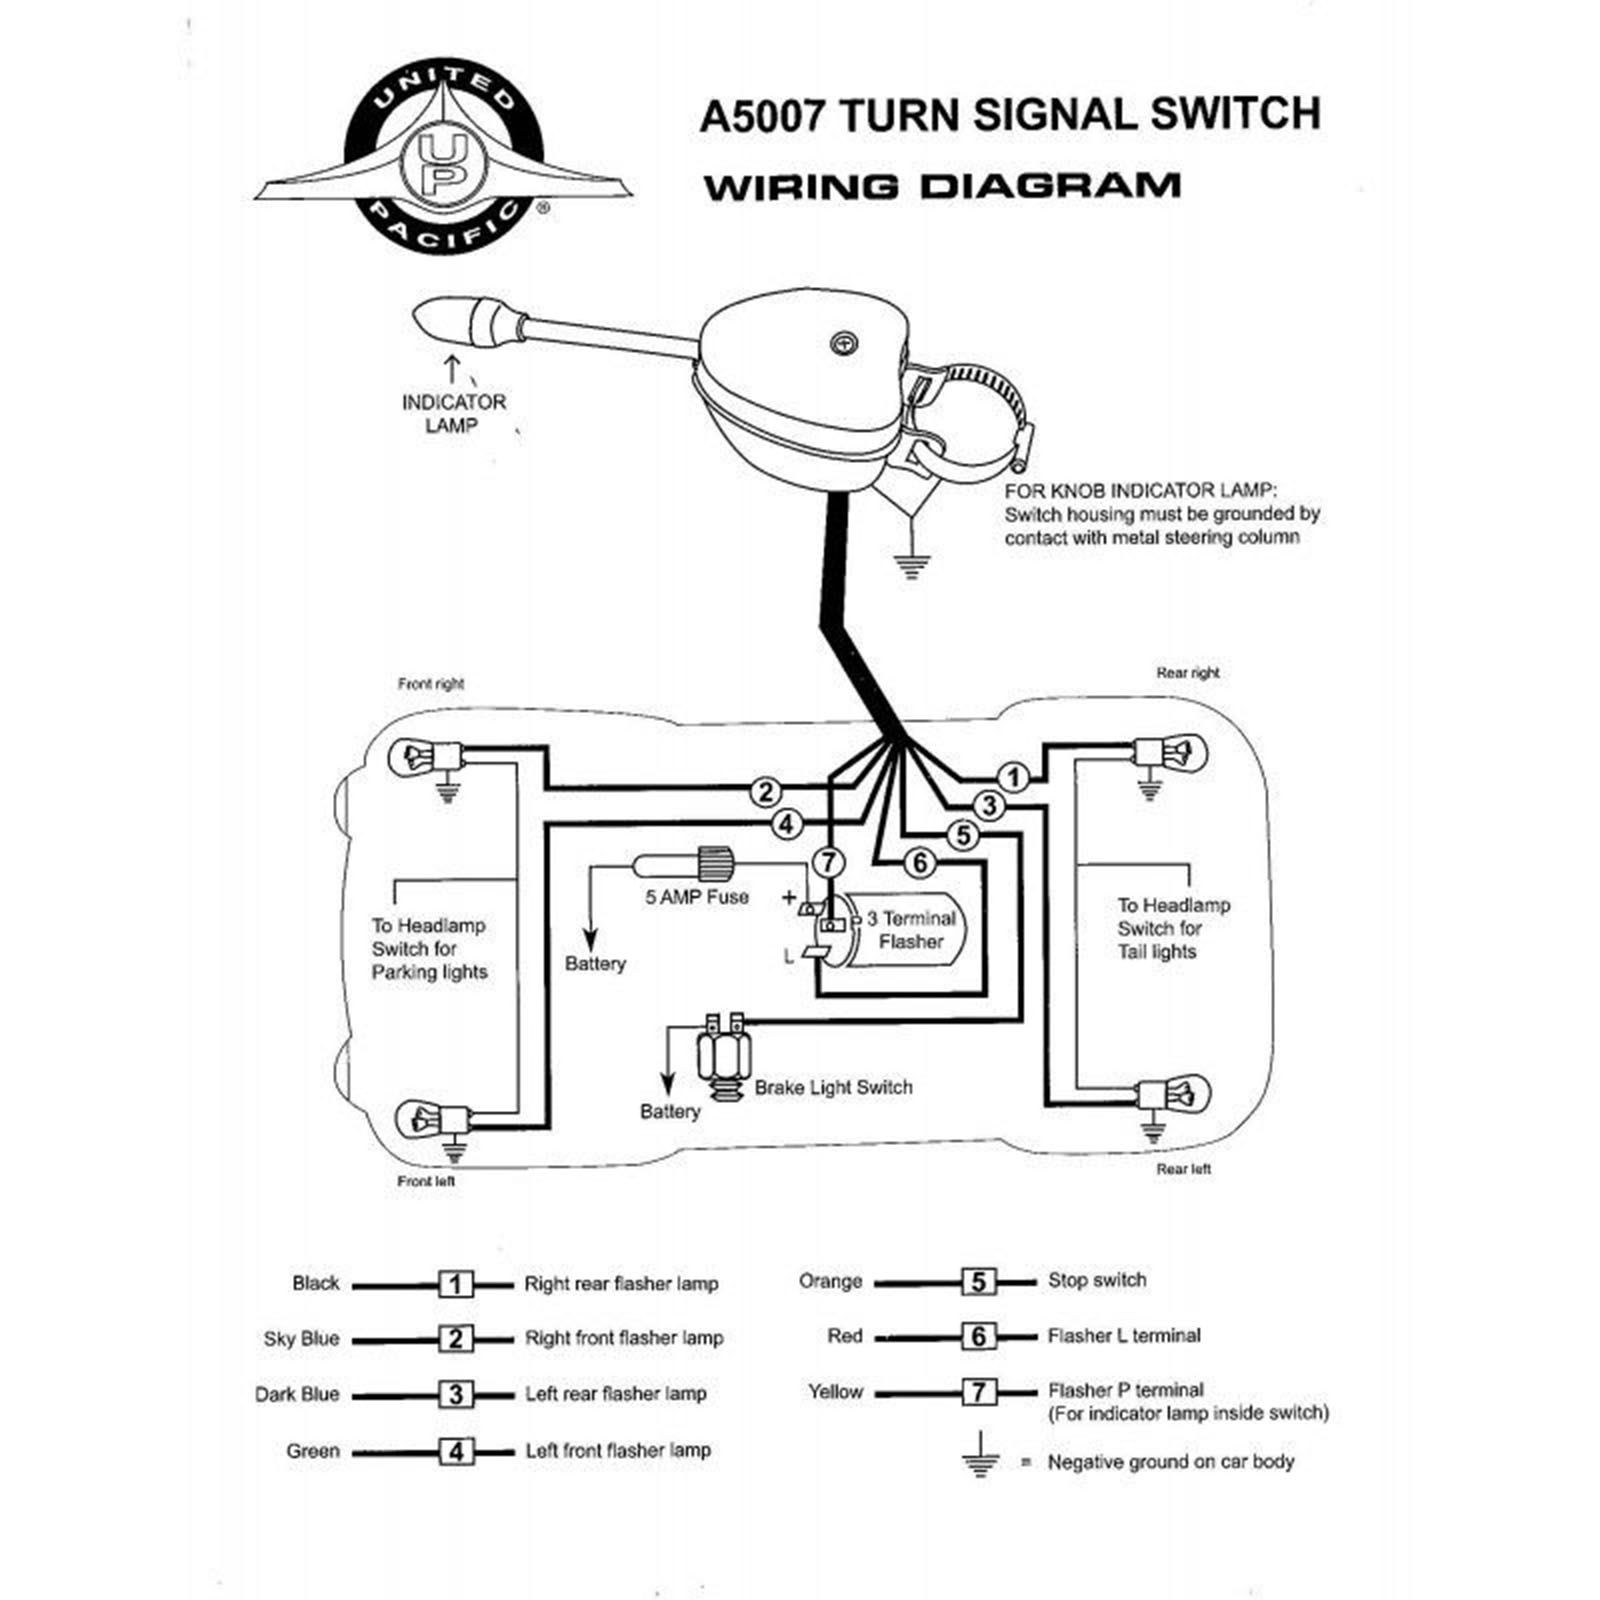 1967 Mustang Turn Signal Switch Wiring Diagram from images.octanelighting.com